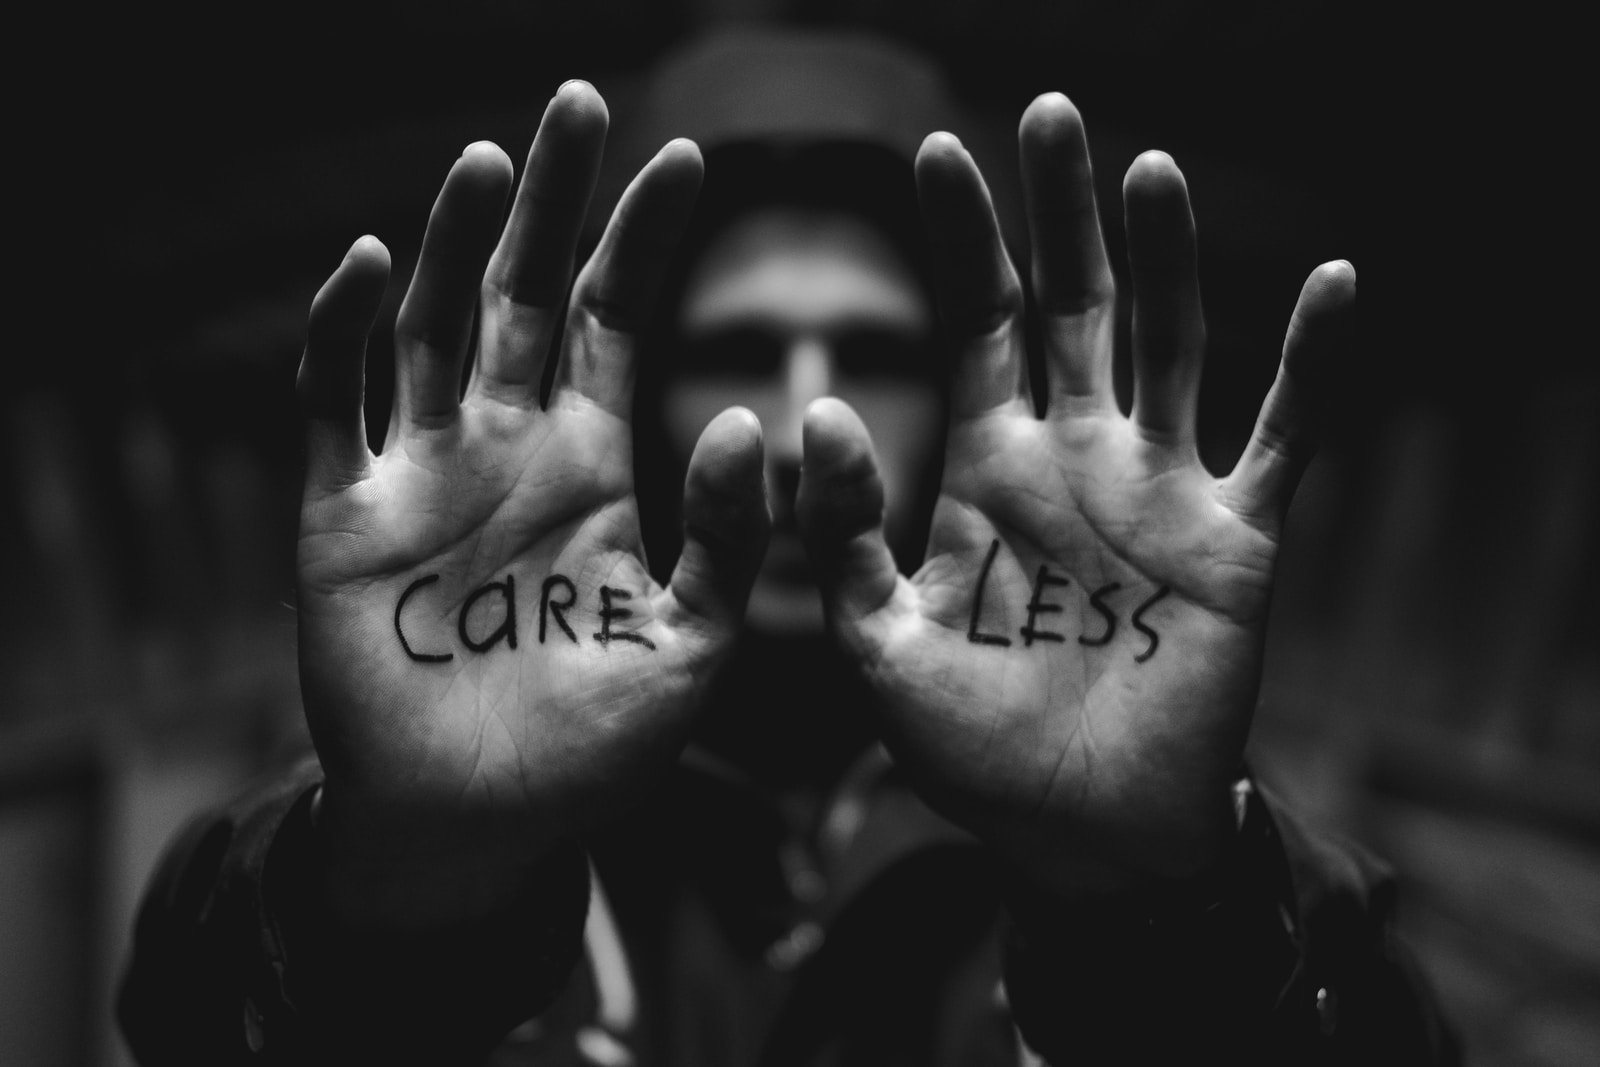 gray scale photography of man raising both hands with care less text on palm